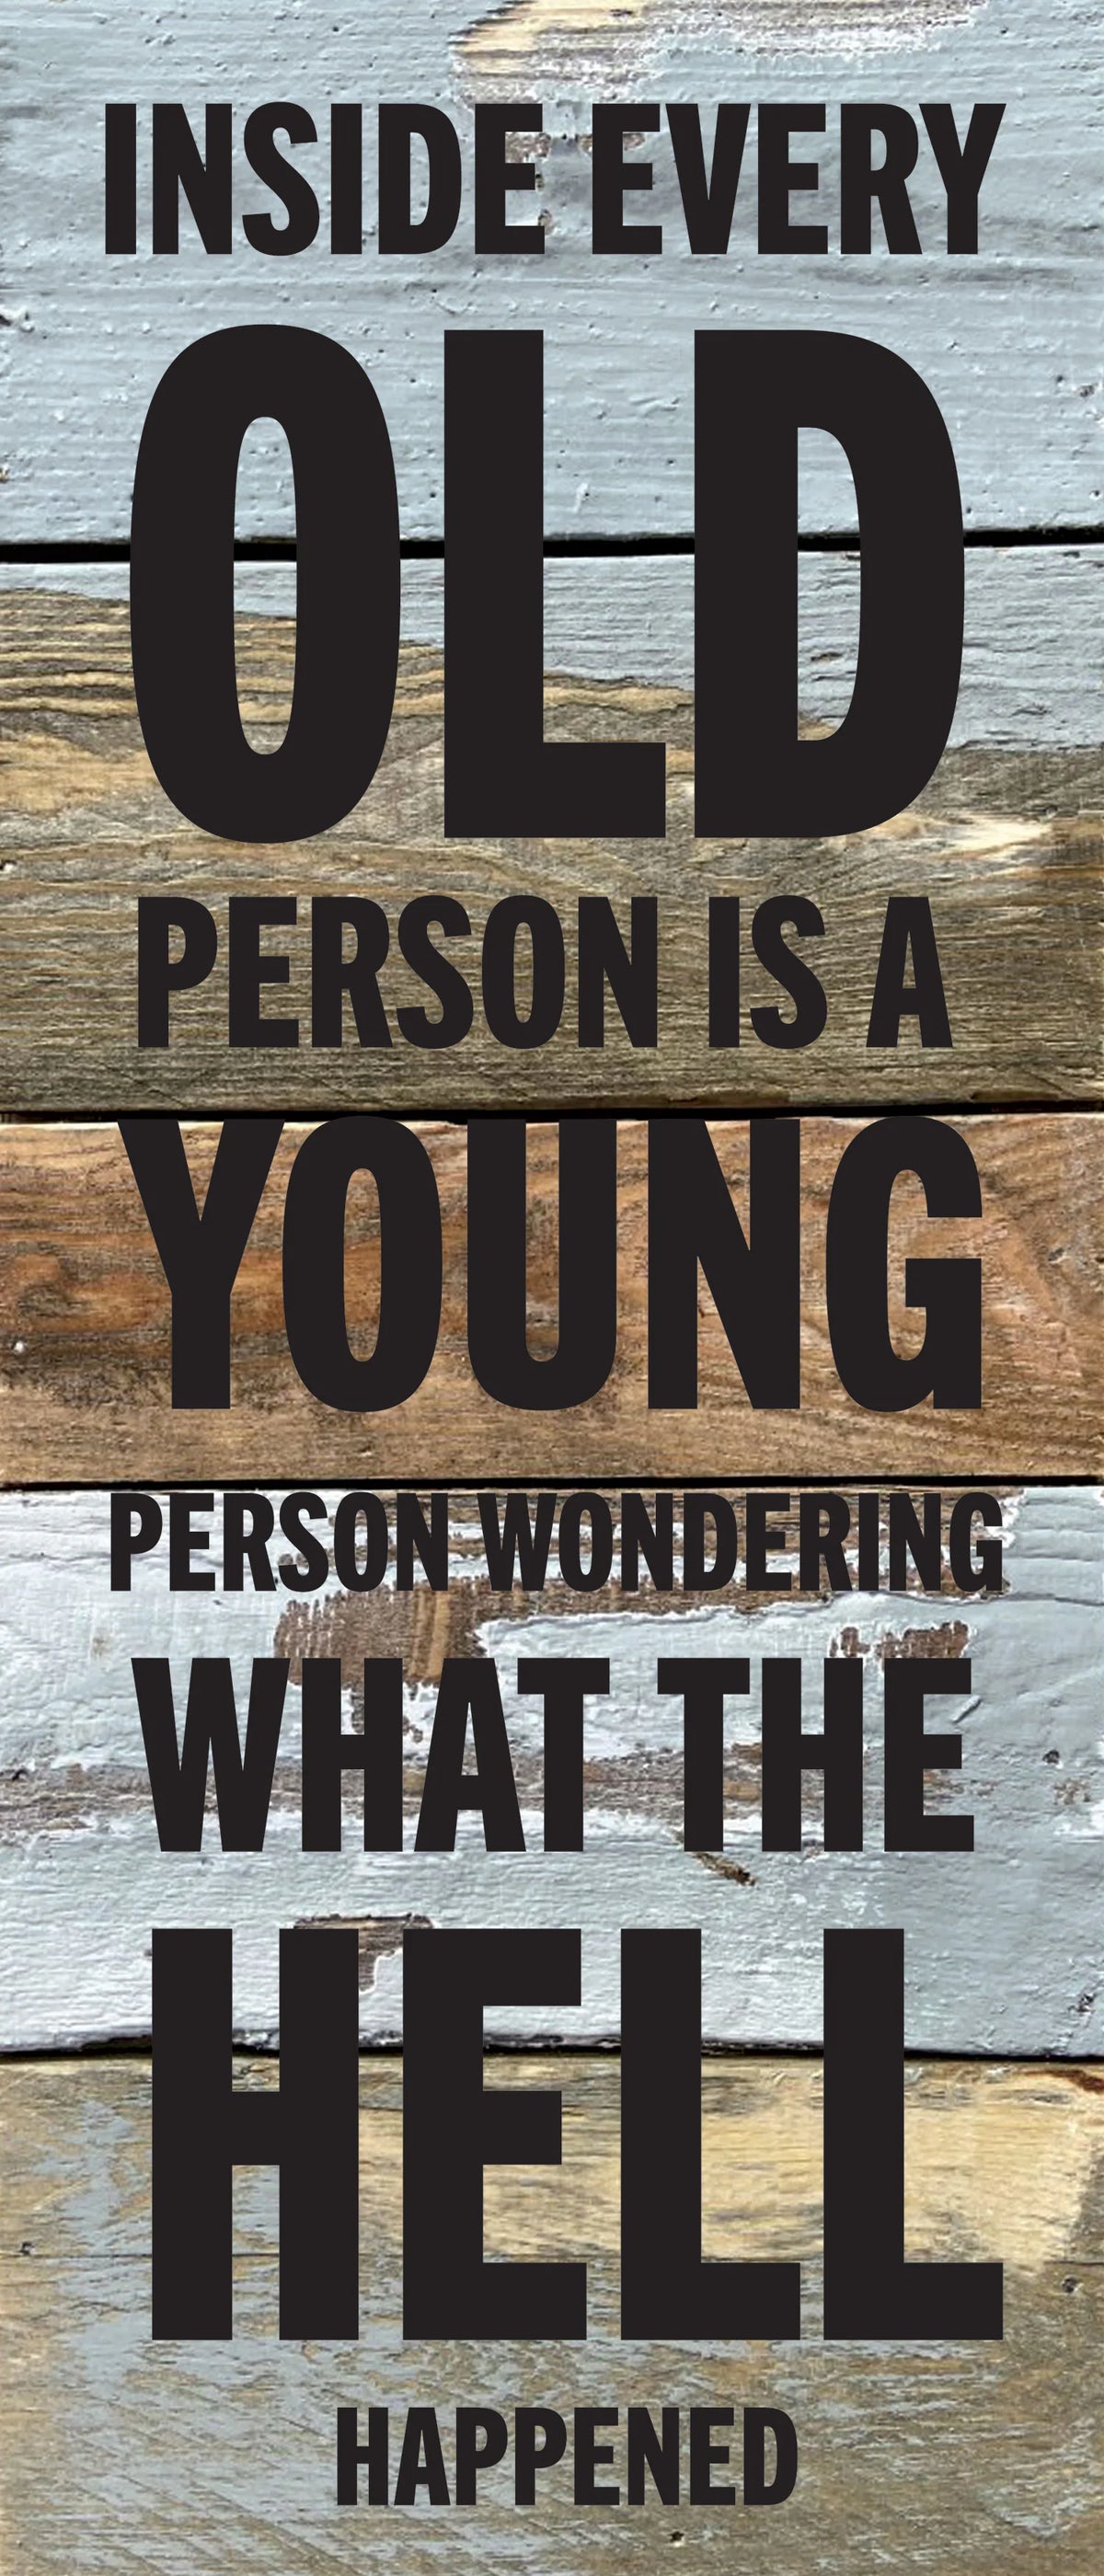 Inside every old person is a young person wondering what the hell happened / 6x14 Reclaimed Wood Wall Decor